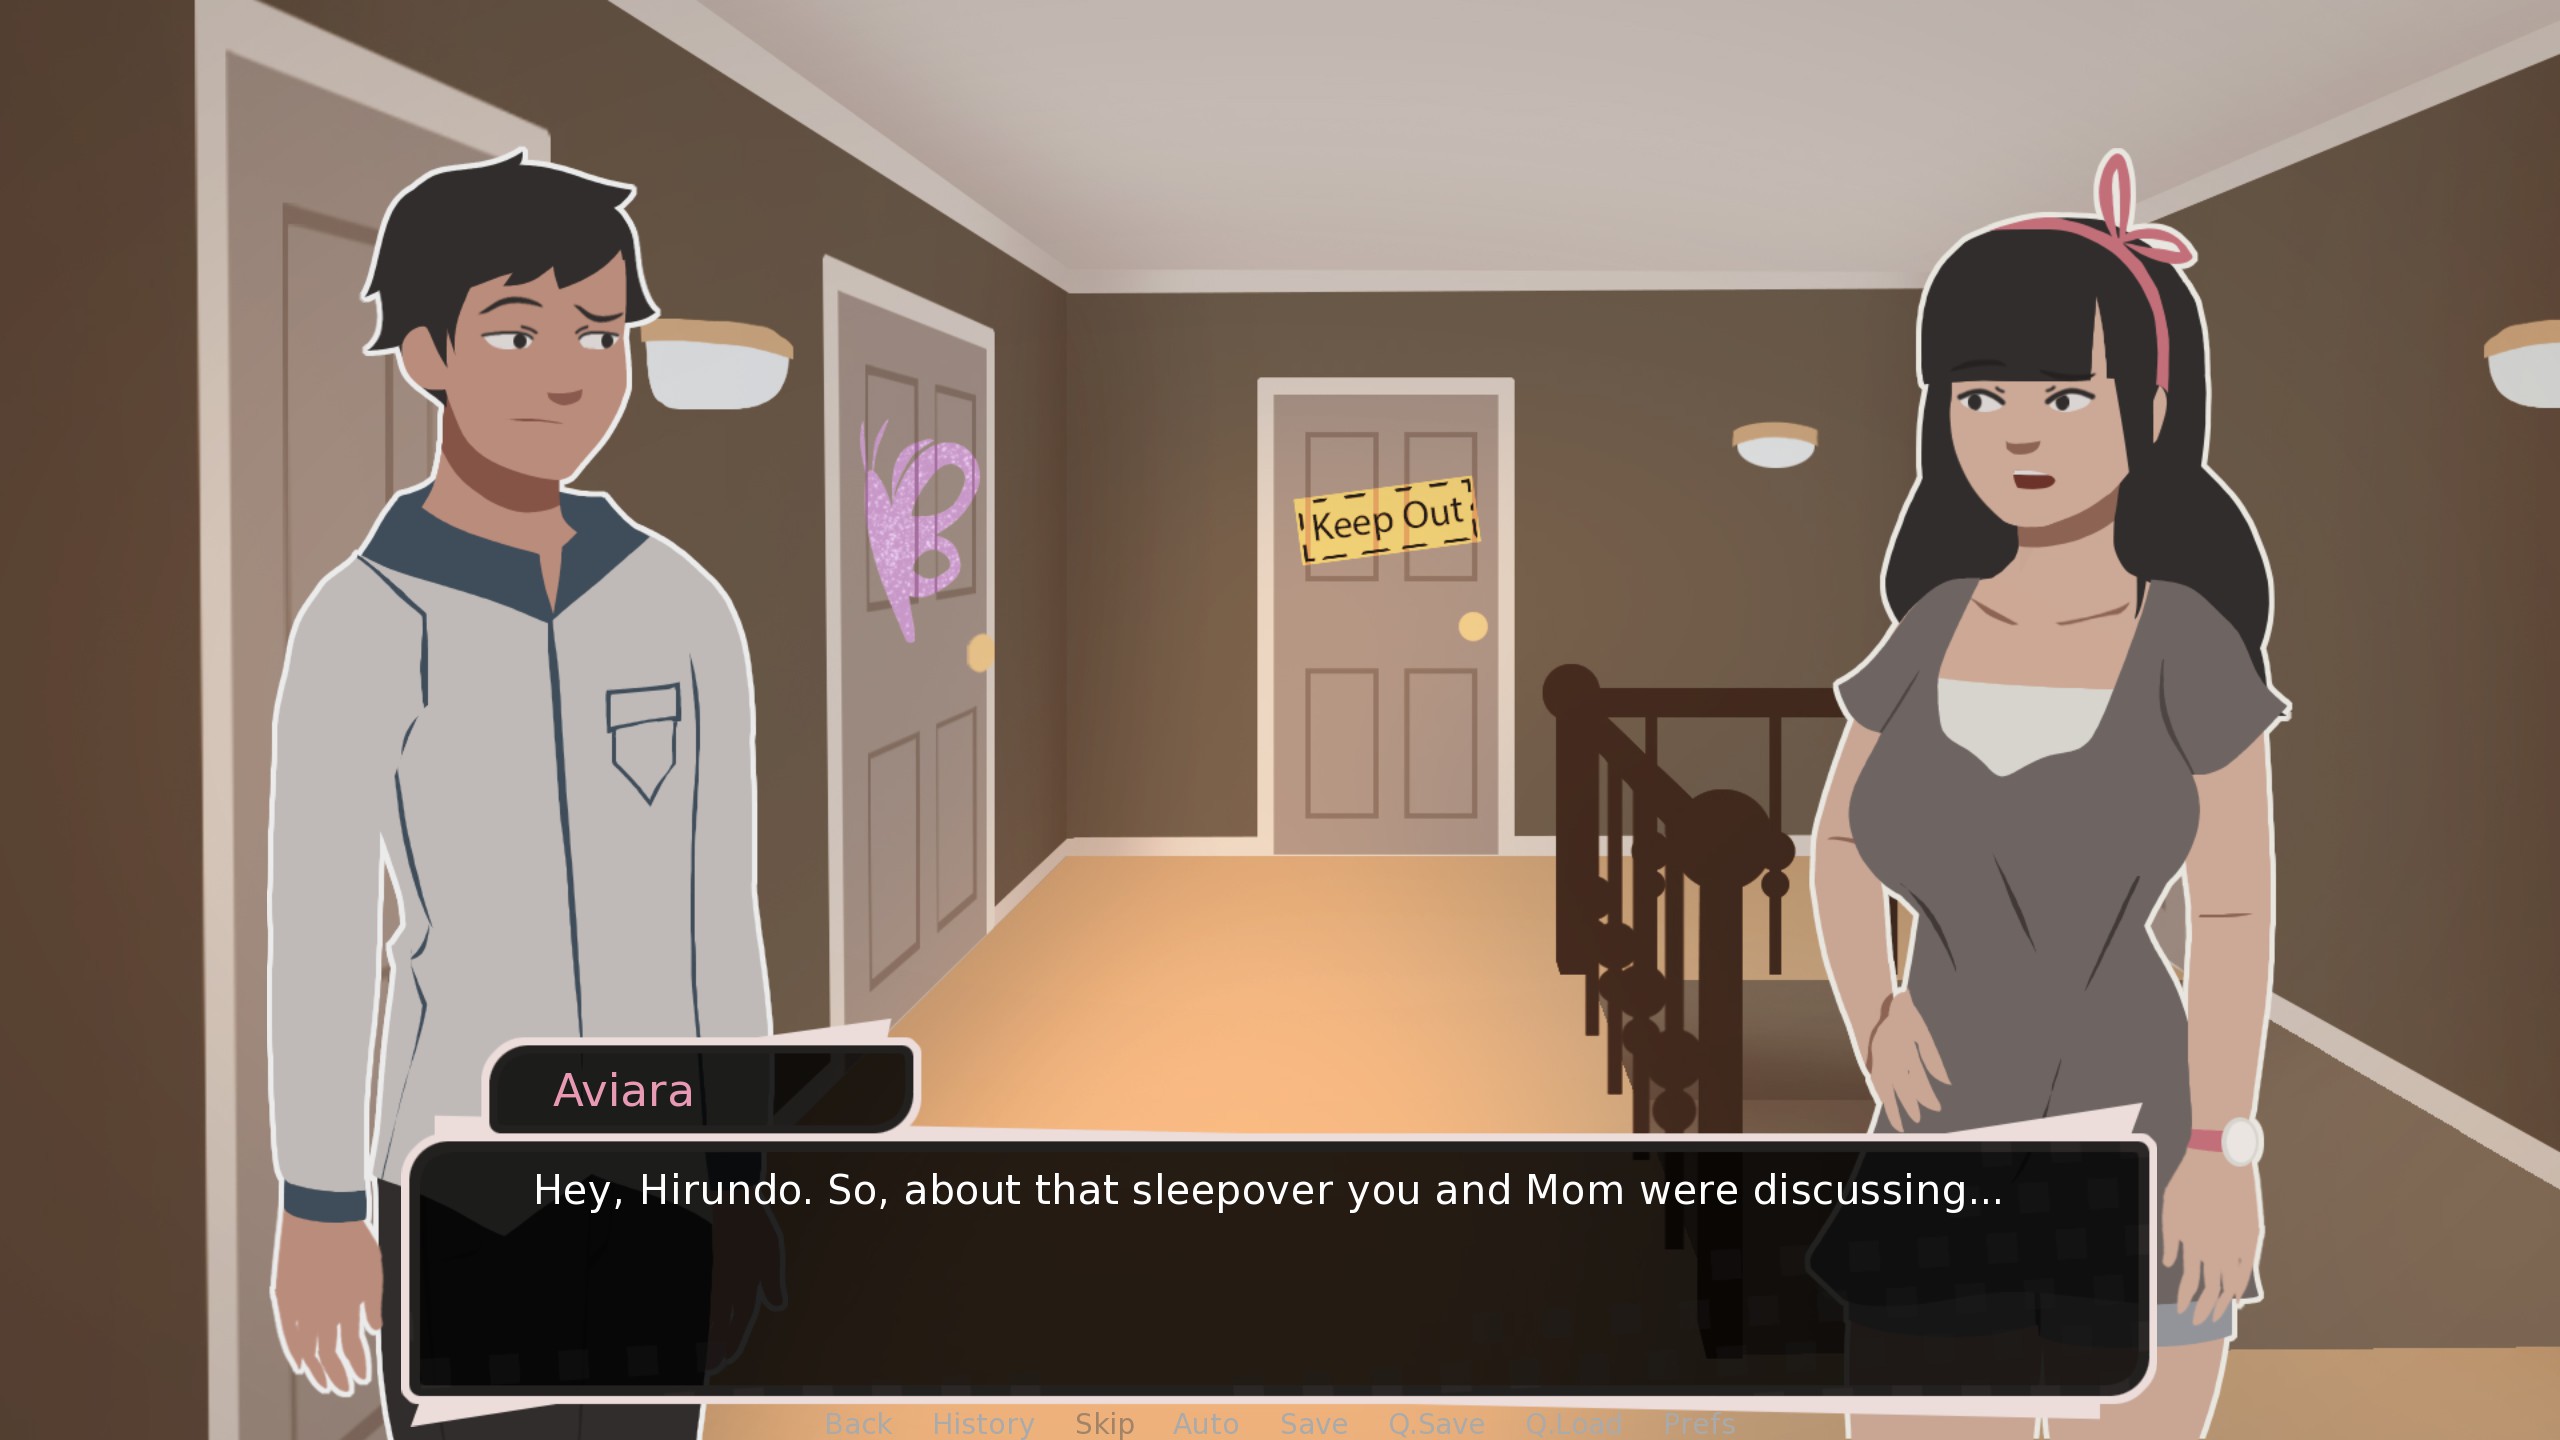 Example of dialogue and custom name